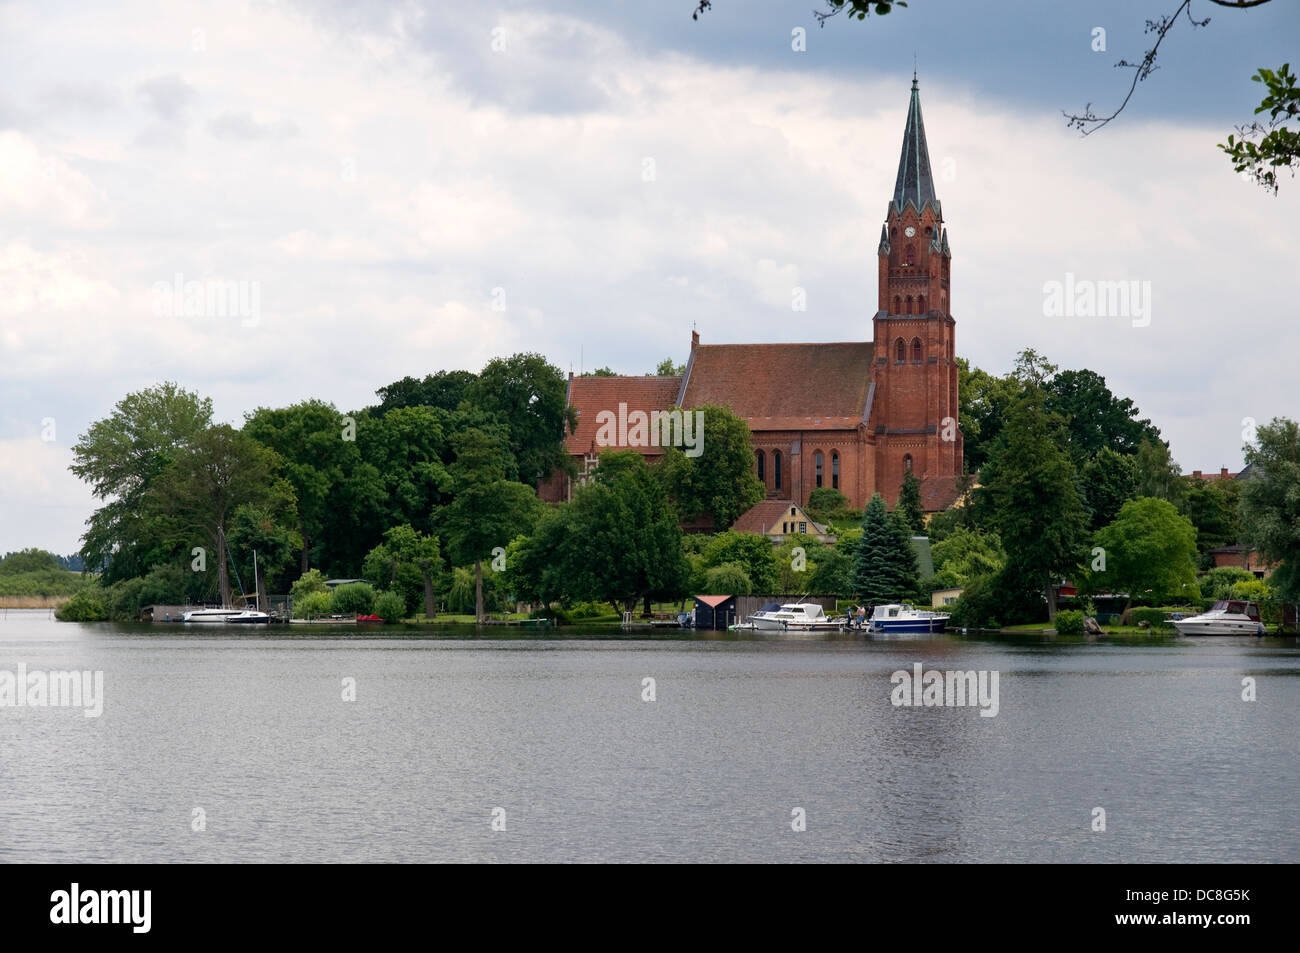 View over part of Müritz Lake to St. Marys church in Röbel, Mecklenburg, Germany Stock Photo